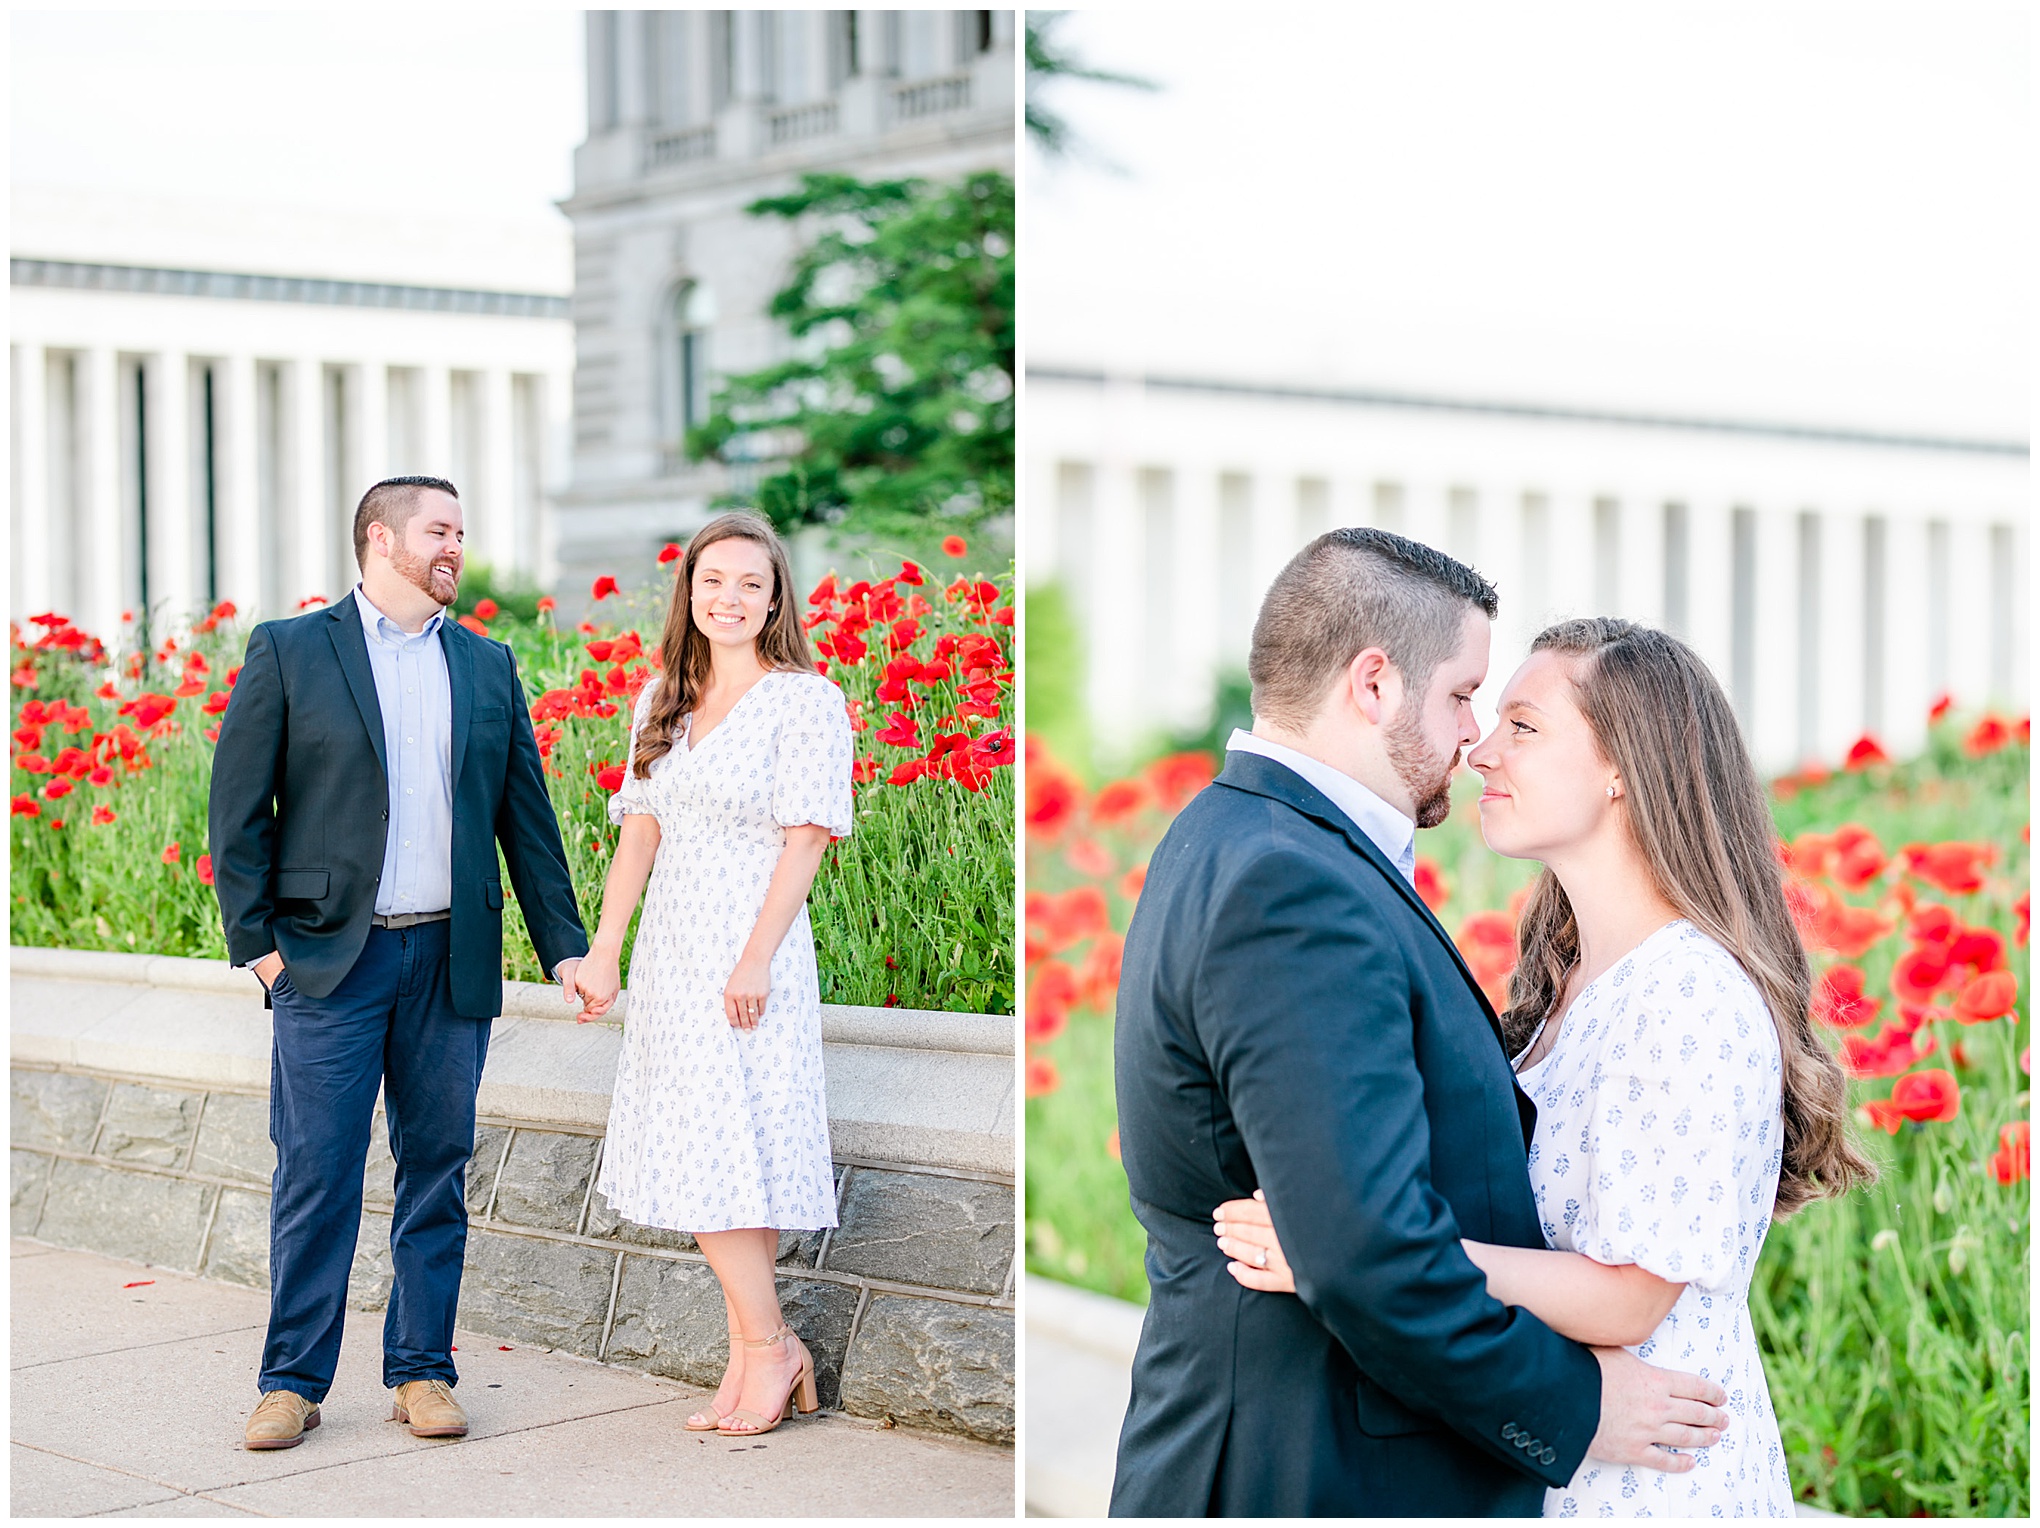 Capitol Hill engagement session, Capitol Hill portraits, D.C. engagement photography, D.C. engagement photographer, D.C. Capitol Hill D.C., DC photography, engagement photography, Rachel E.H. Photography, classic engagement photos, spring engagement photos, red white and blue aesthetic, poppies